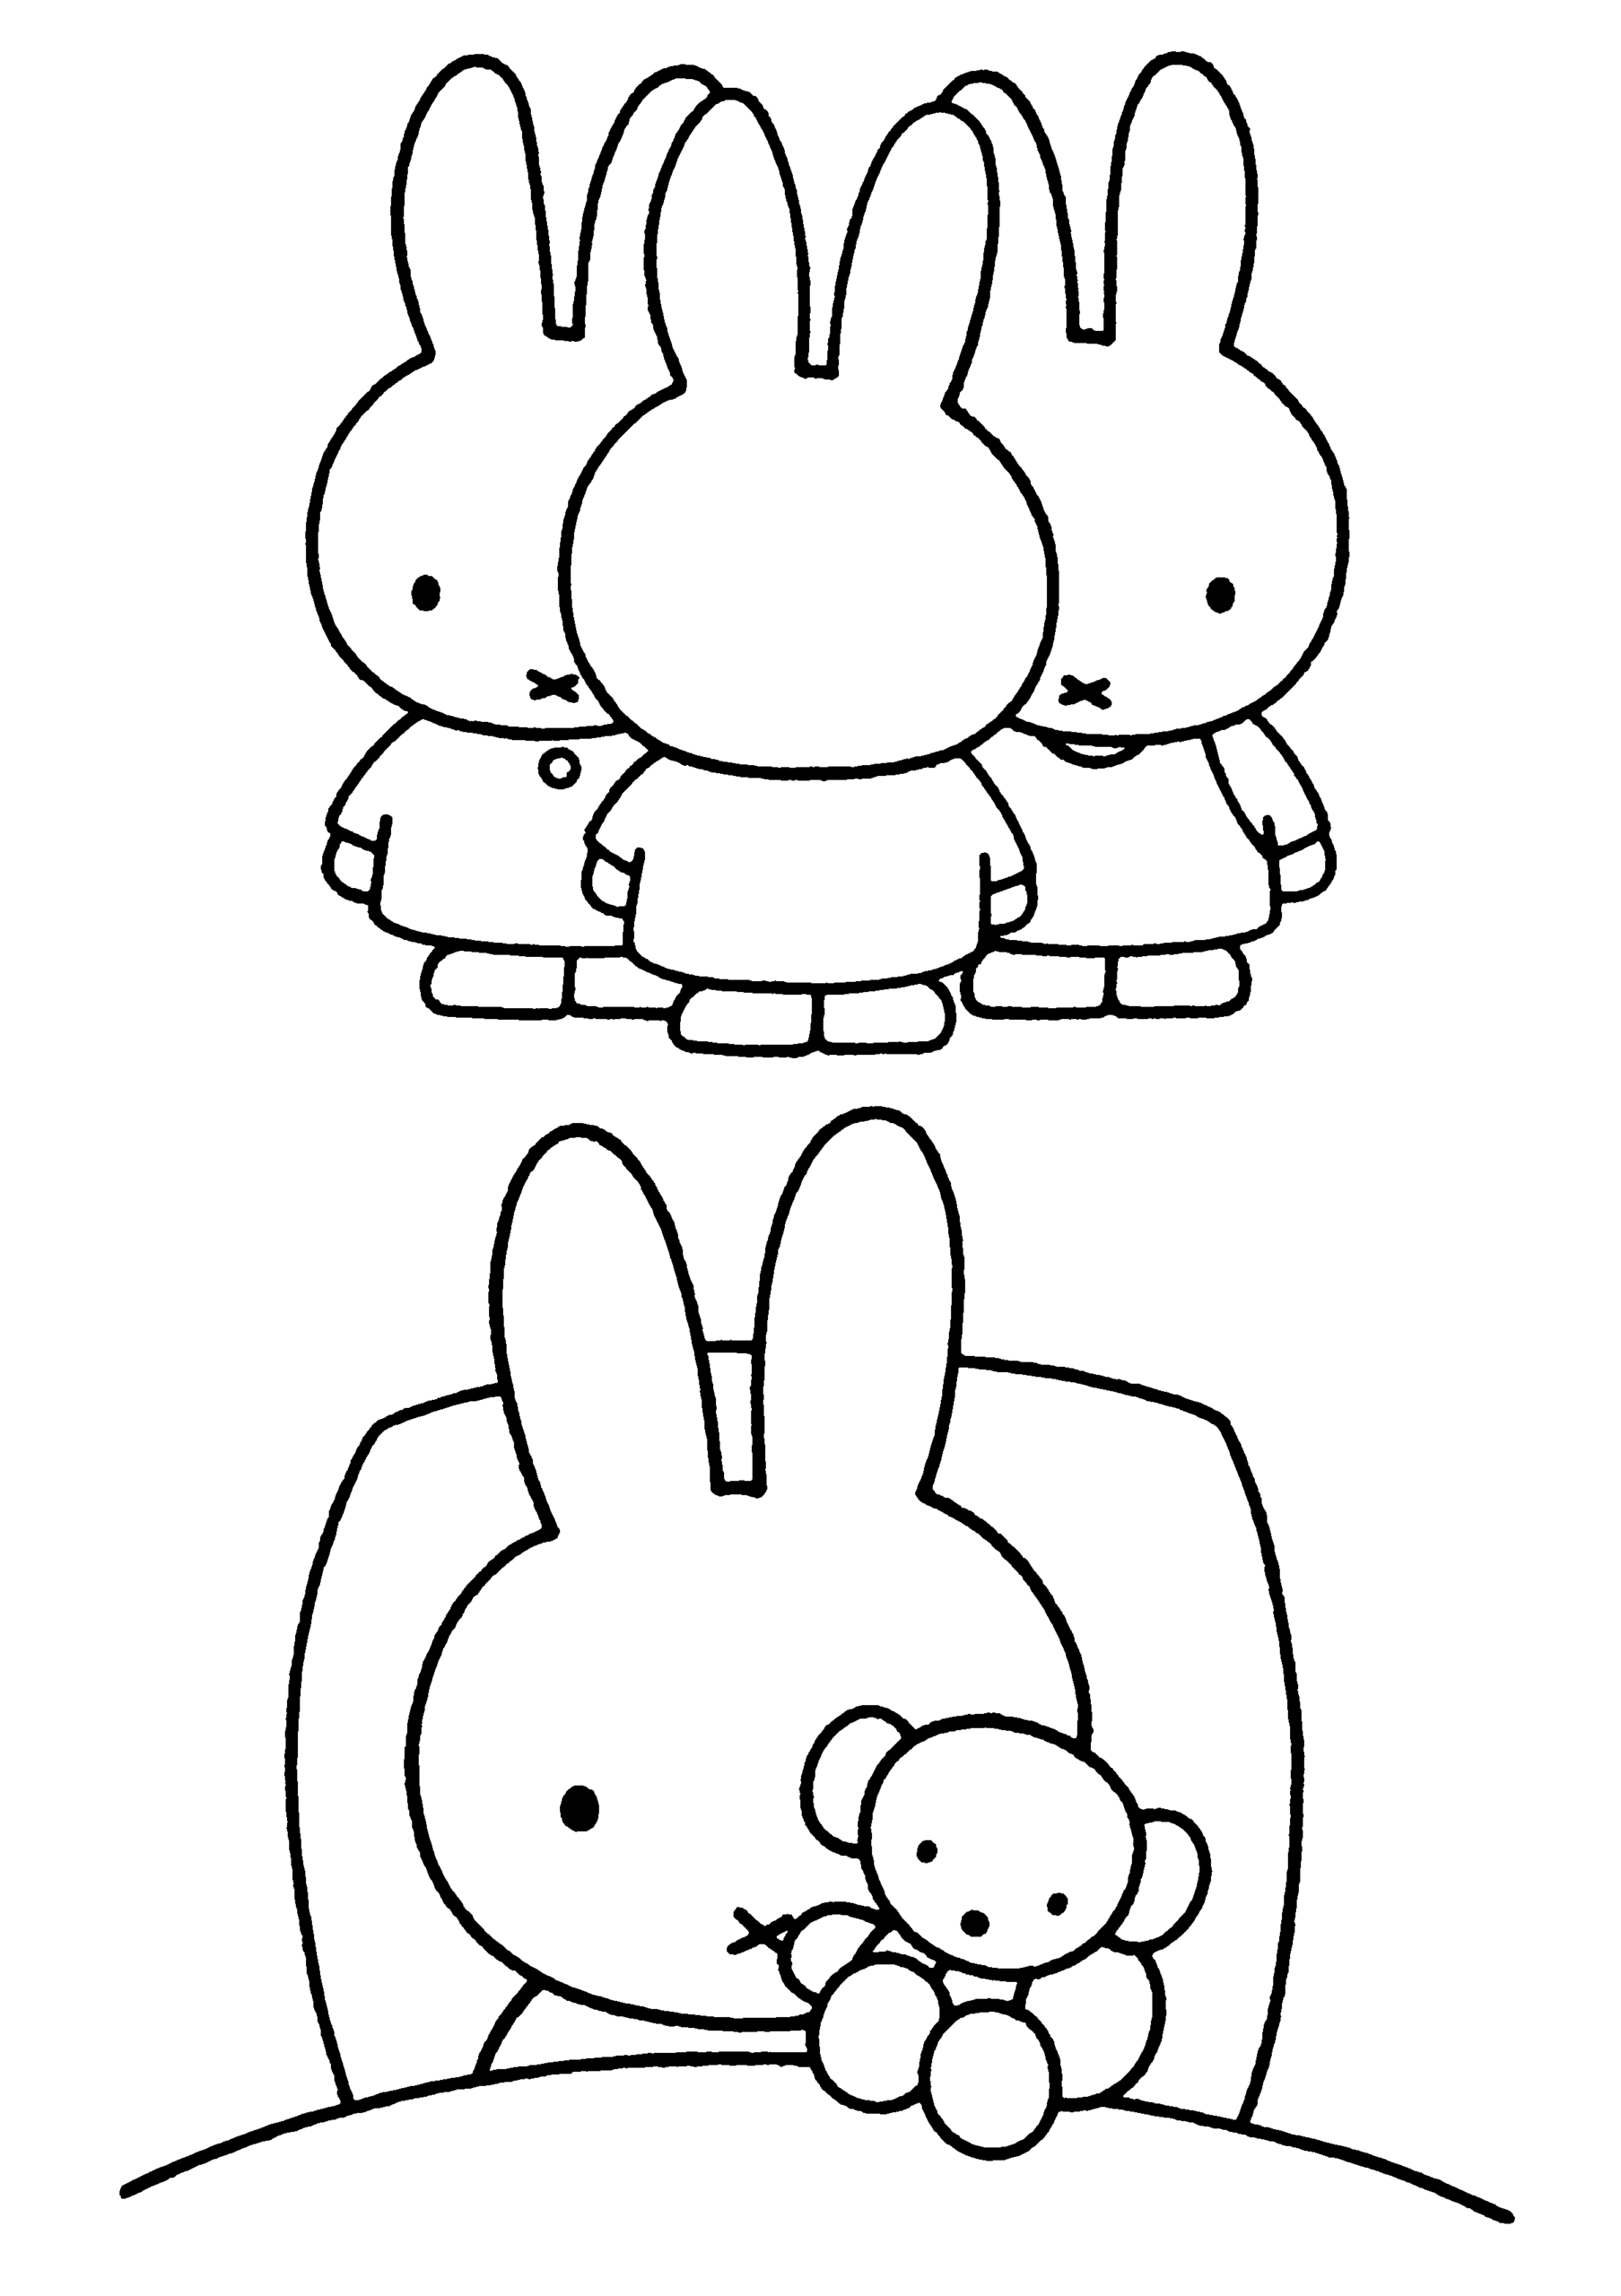 Miffy Coloring Pages Cartoons miffy 3 Printable 2020 4200 Coloring4free